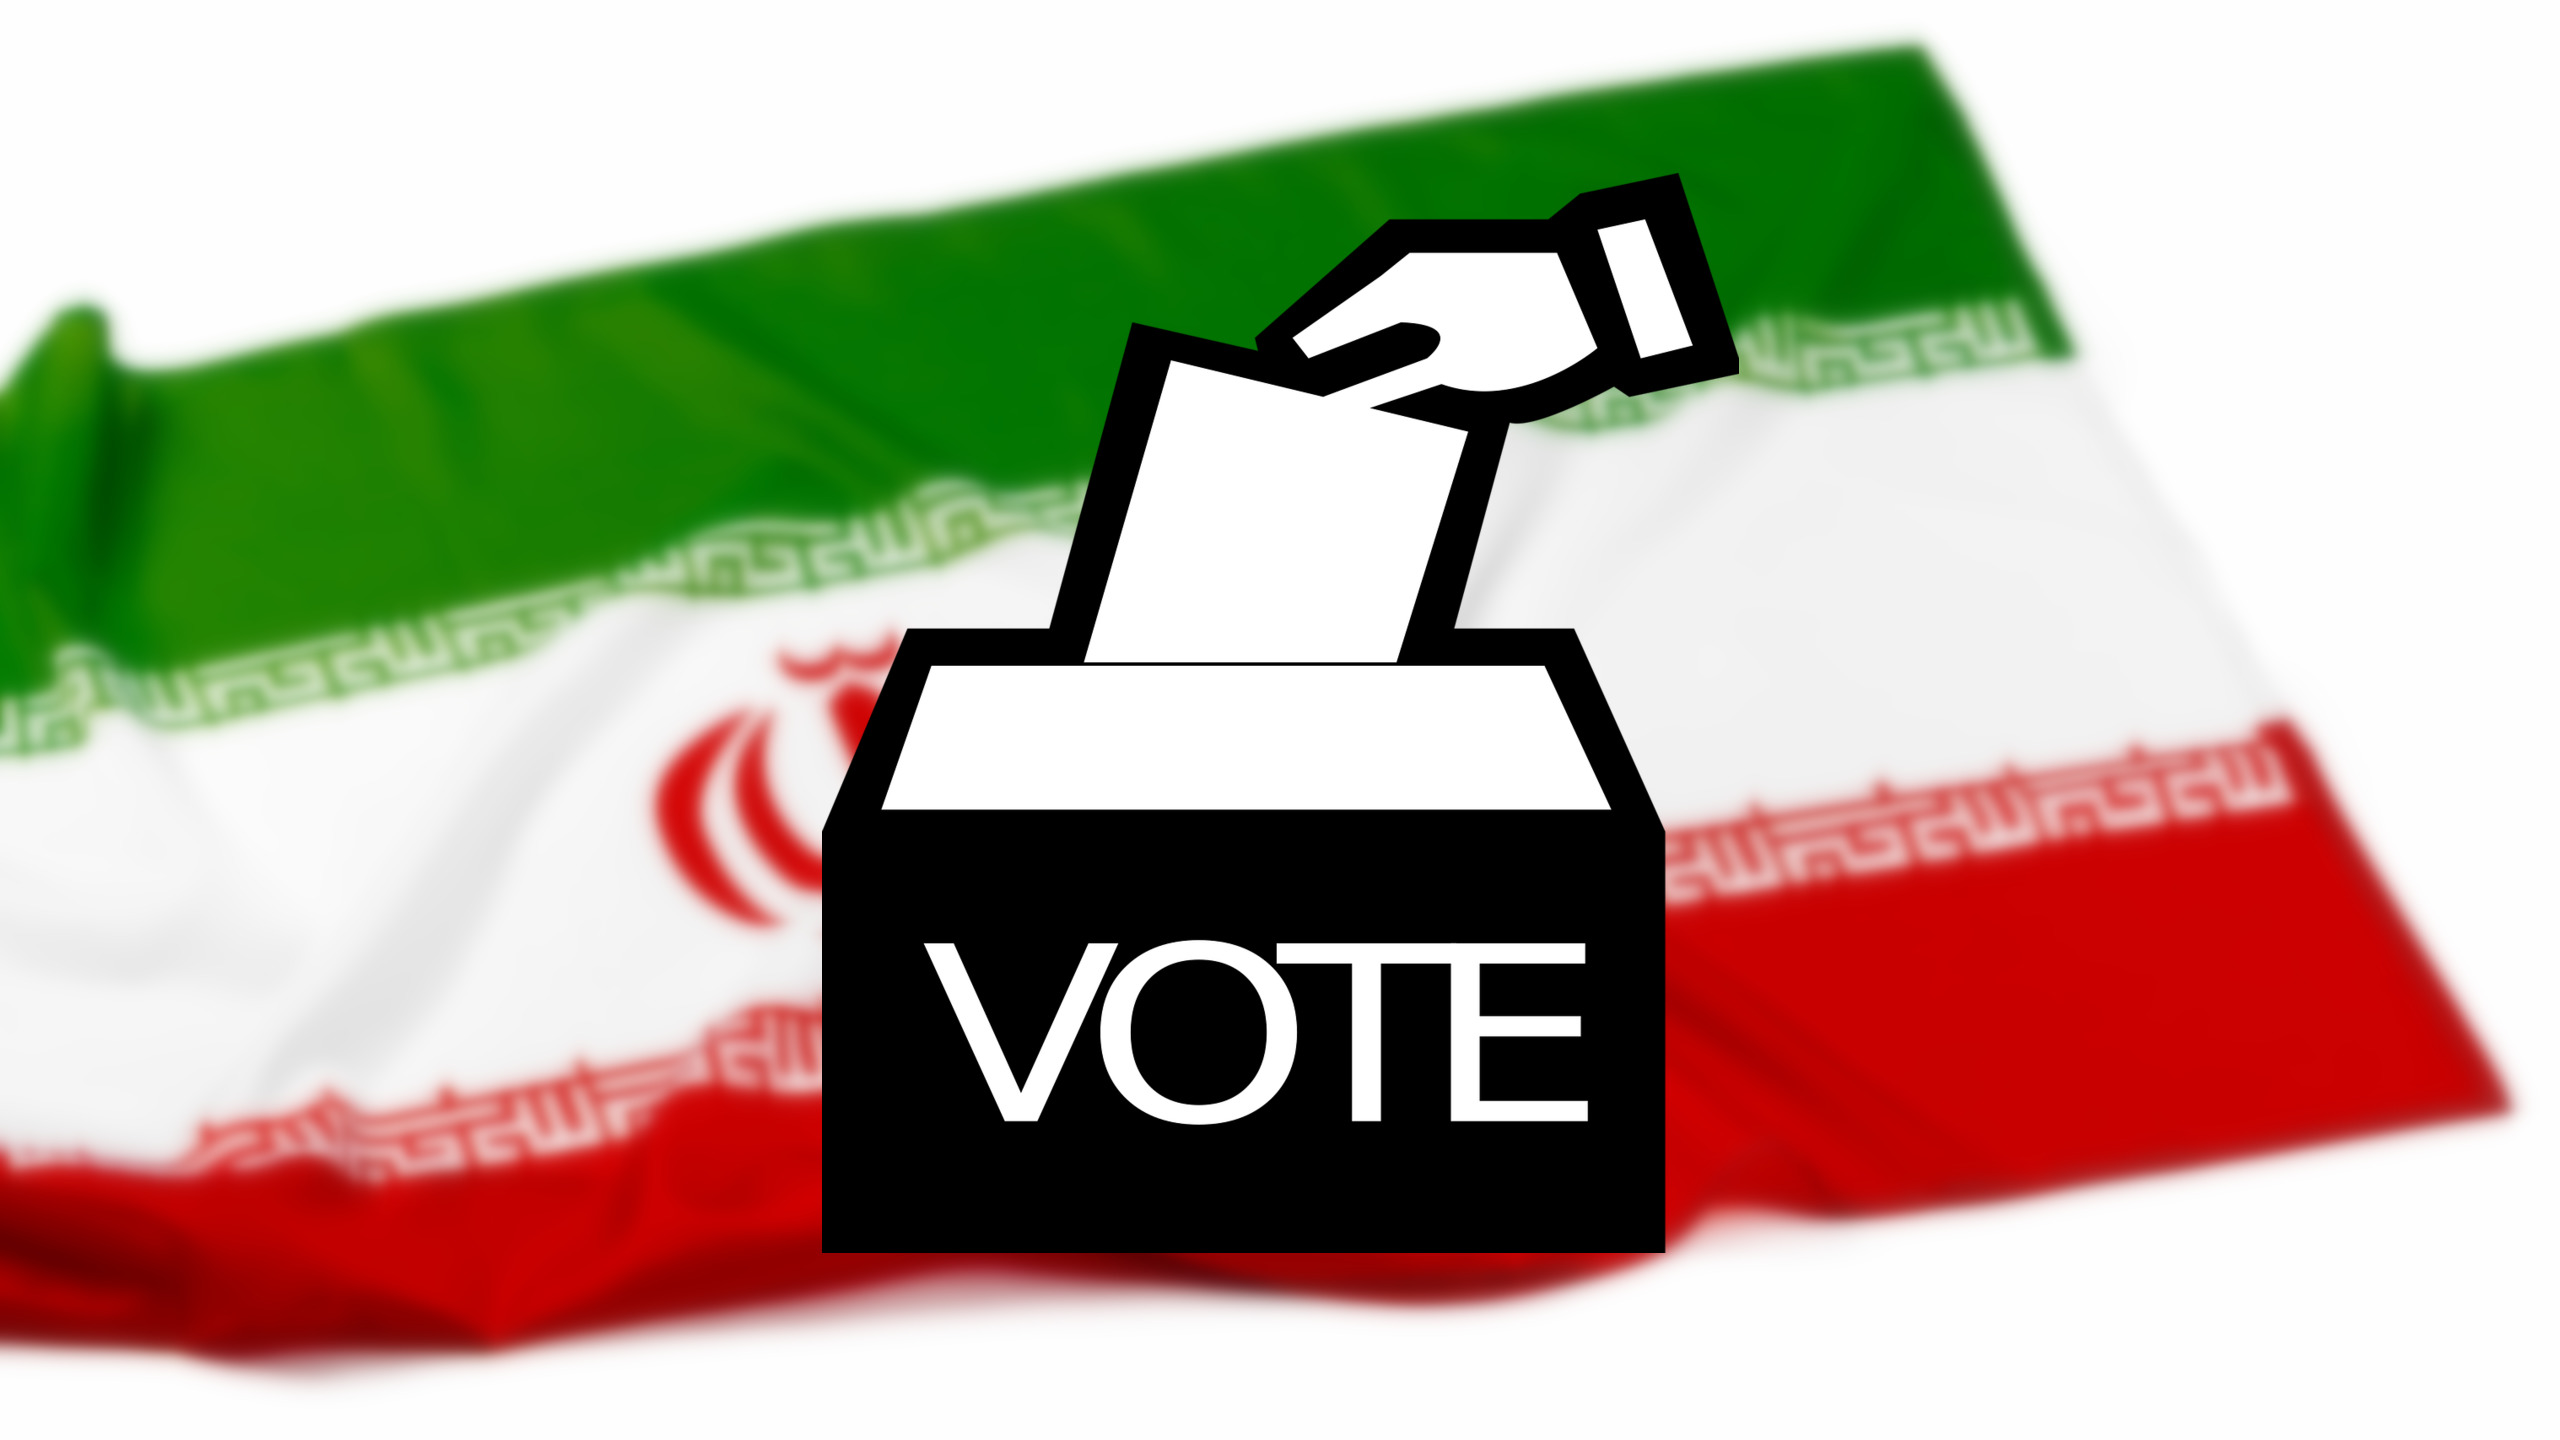 7 Candidates Approved to Run for President in Iran